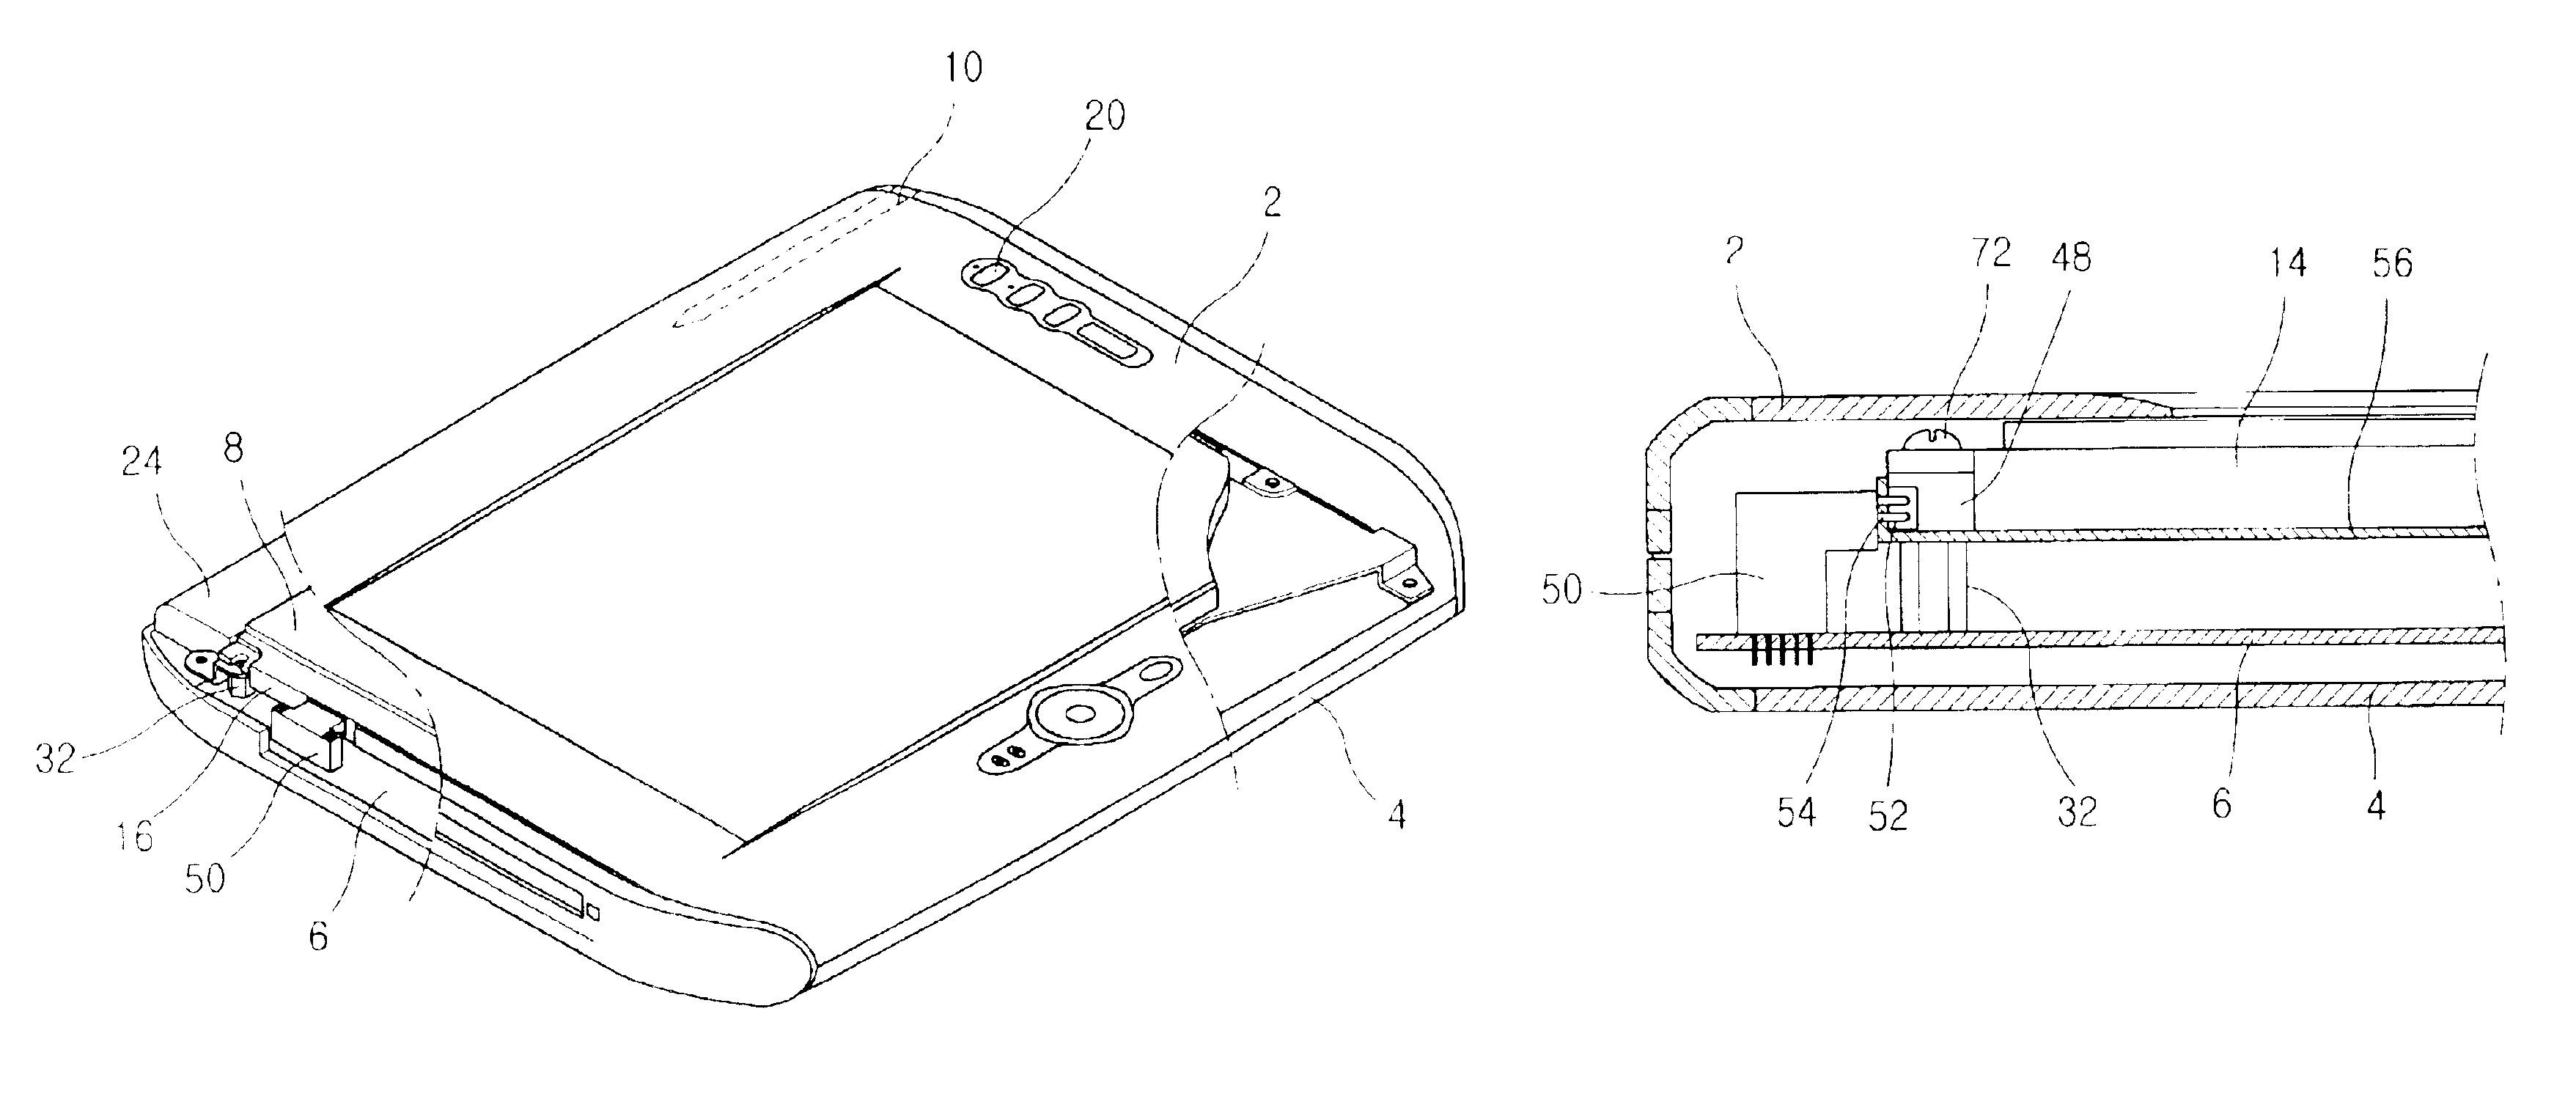 Portable electronic device having LCD and touch screen